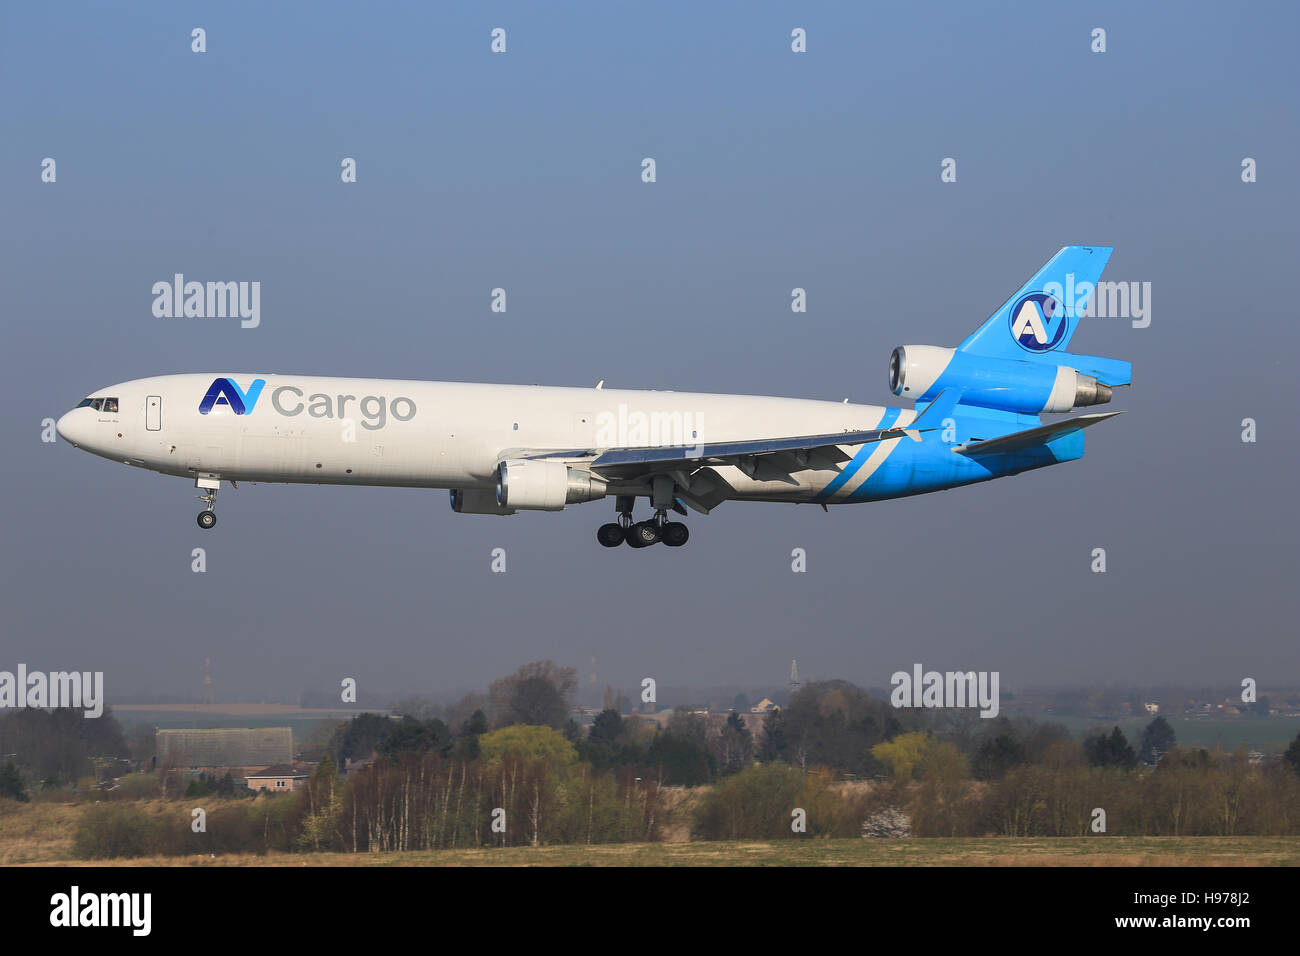 Liege/Netherland August 29, 2015: MD11 from AV at Liege Airport Stock Photo